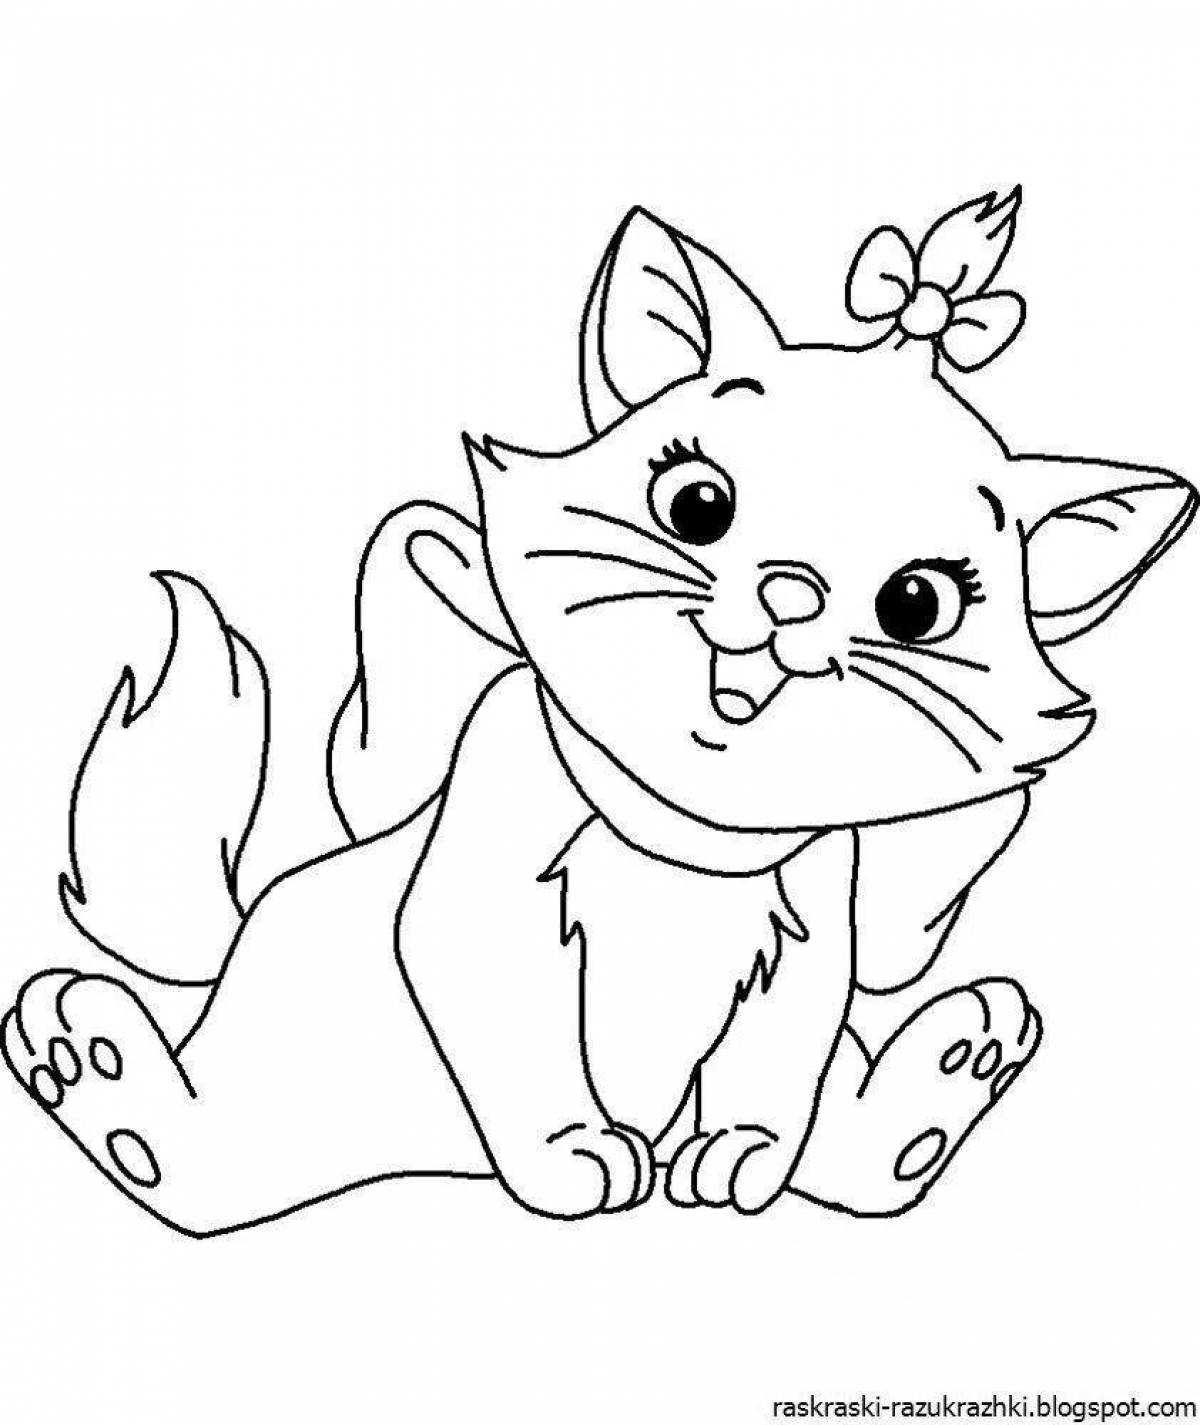 Adorable cat coloring book for kids 5-6 years old